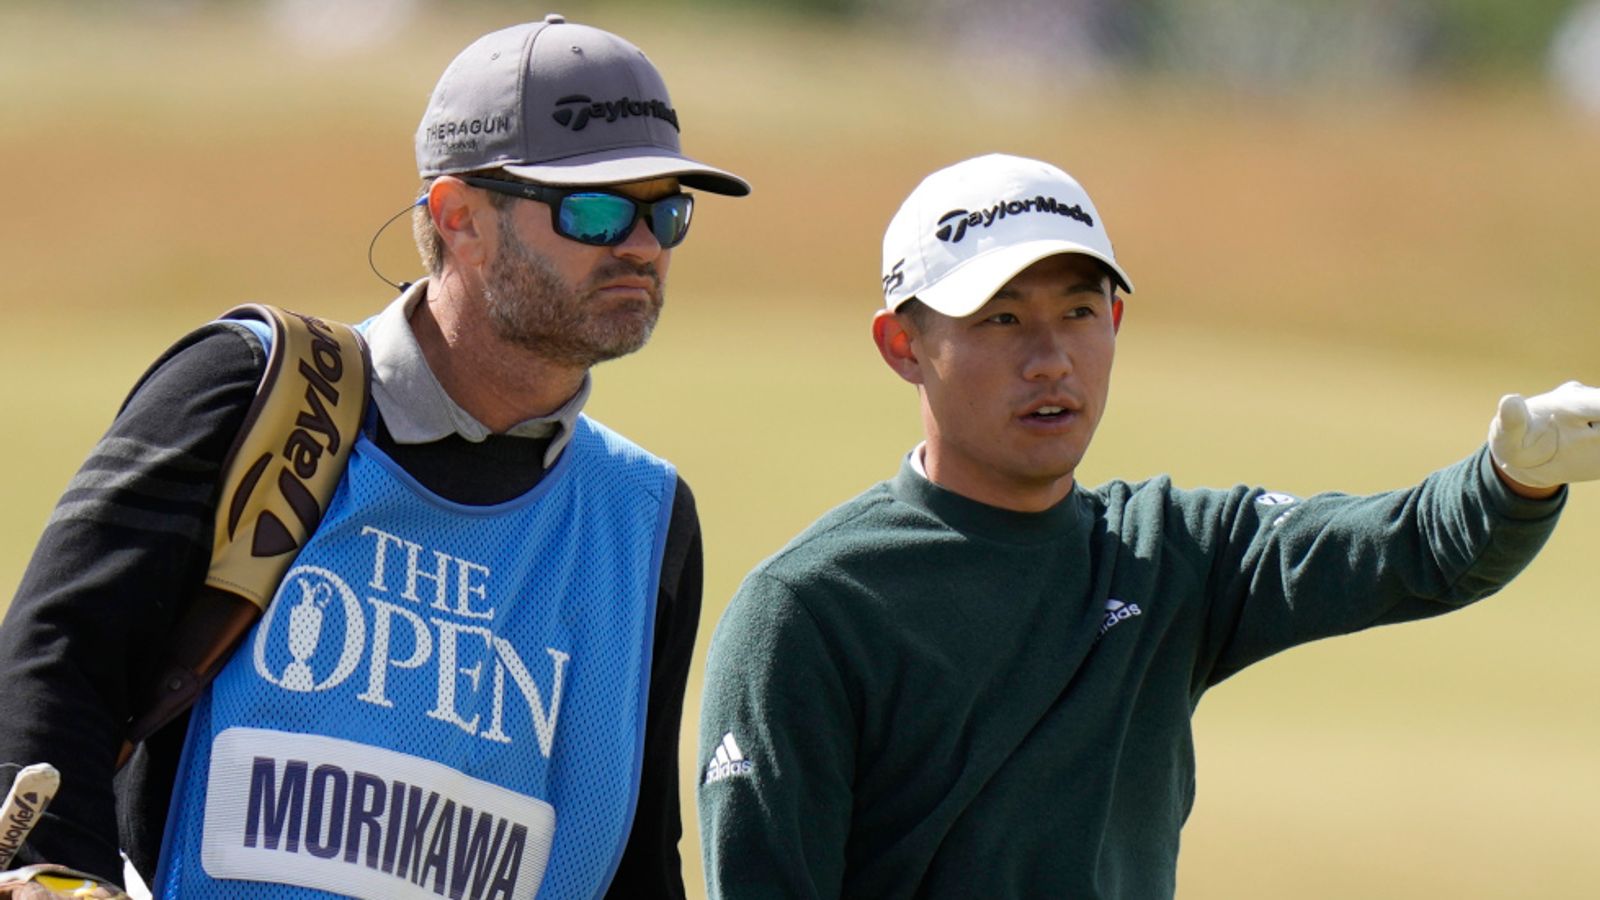 The 150th Open: Why players must risk ‘looking silly’ to impress on the Old Course this week